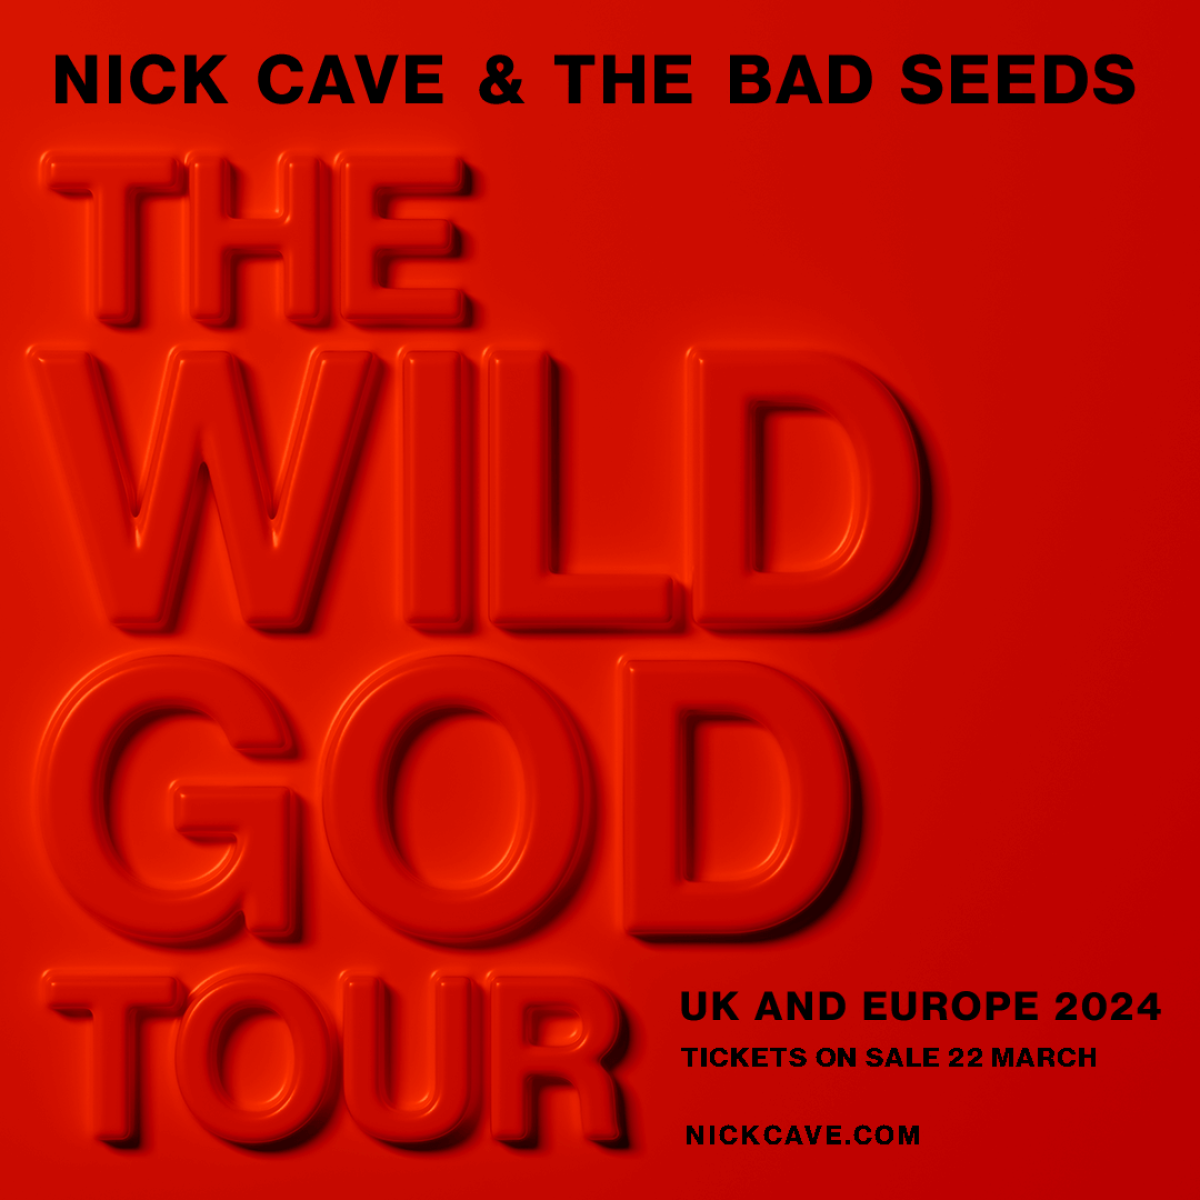 Nick Cave and the Bad Seeds - The Wild God Tour en Uber Arena Tickets